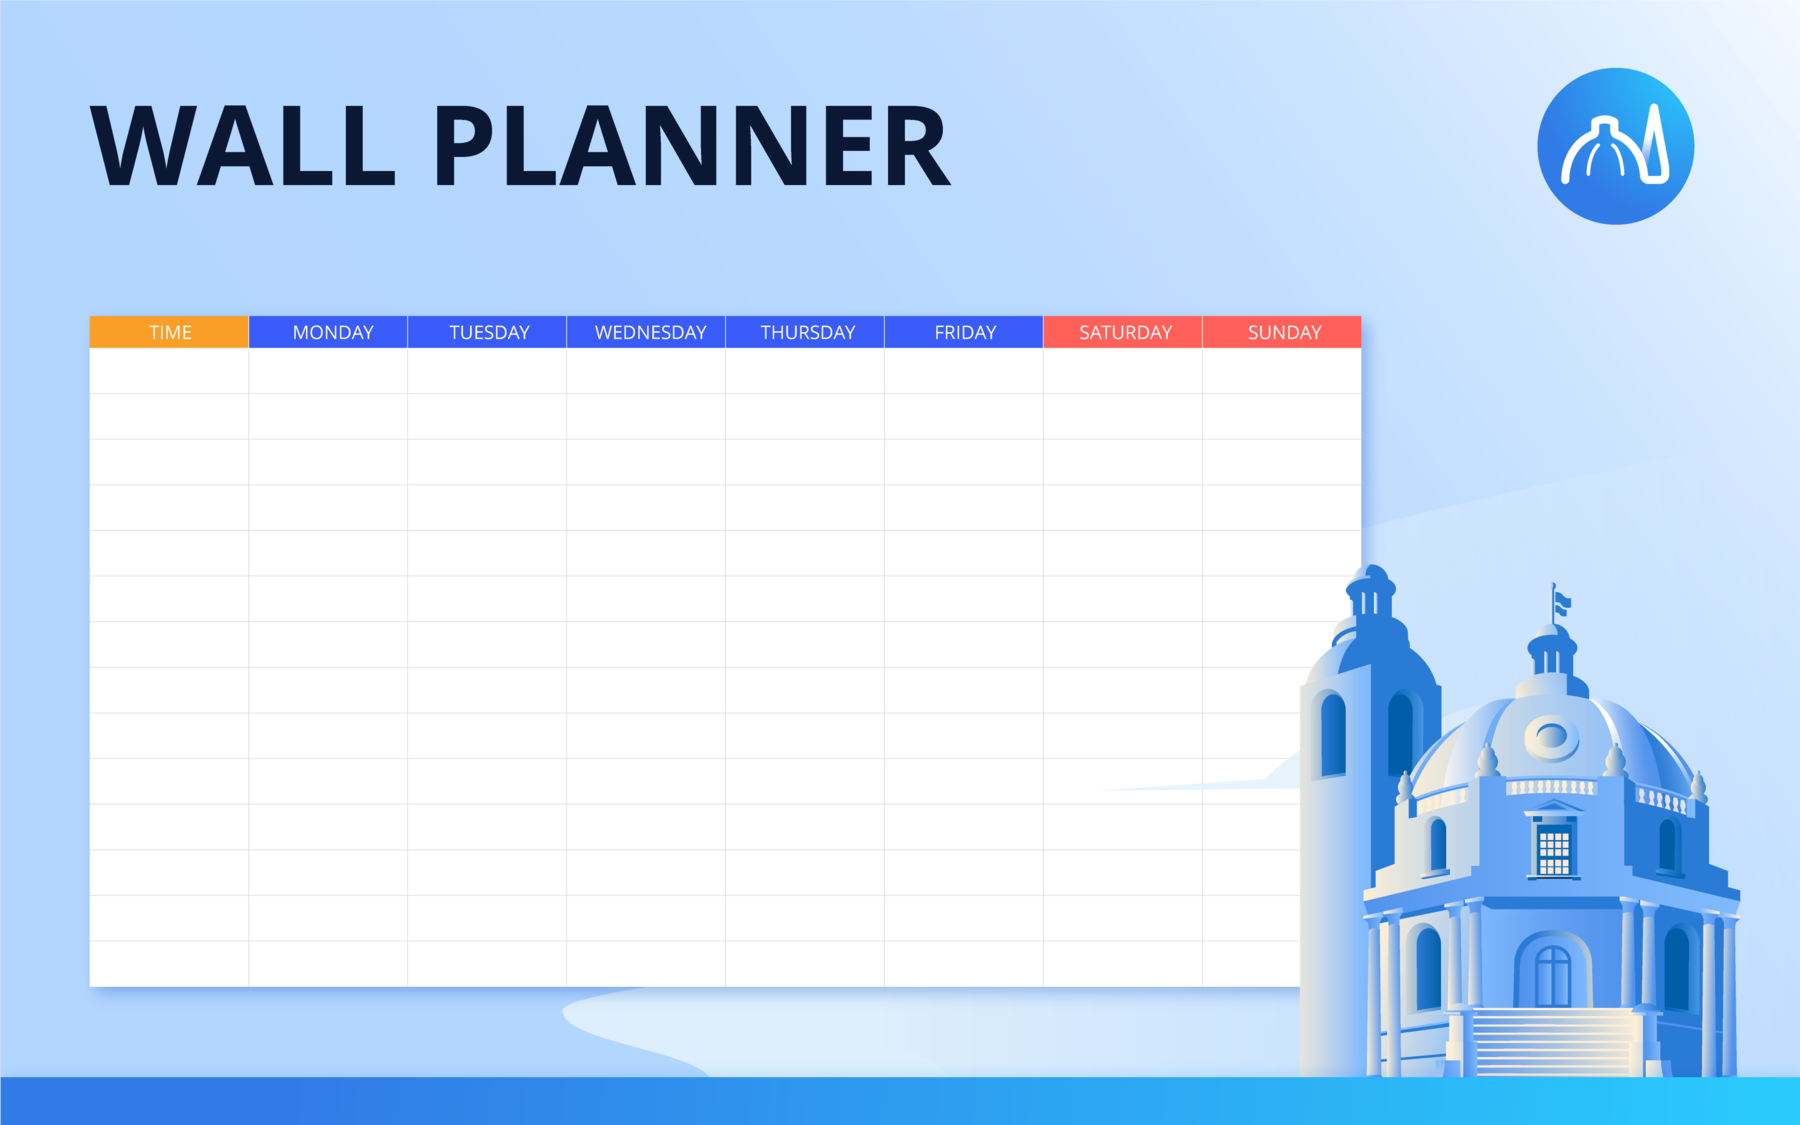 Student Weekly Planner